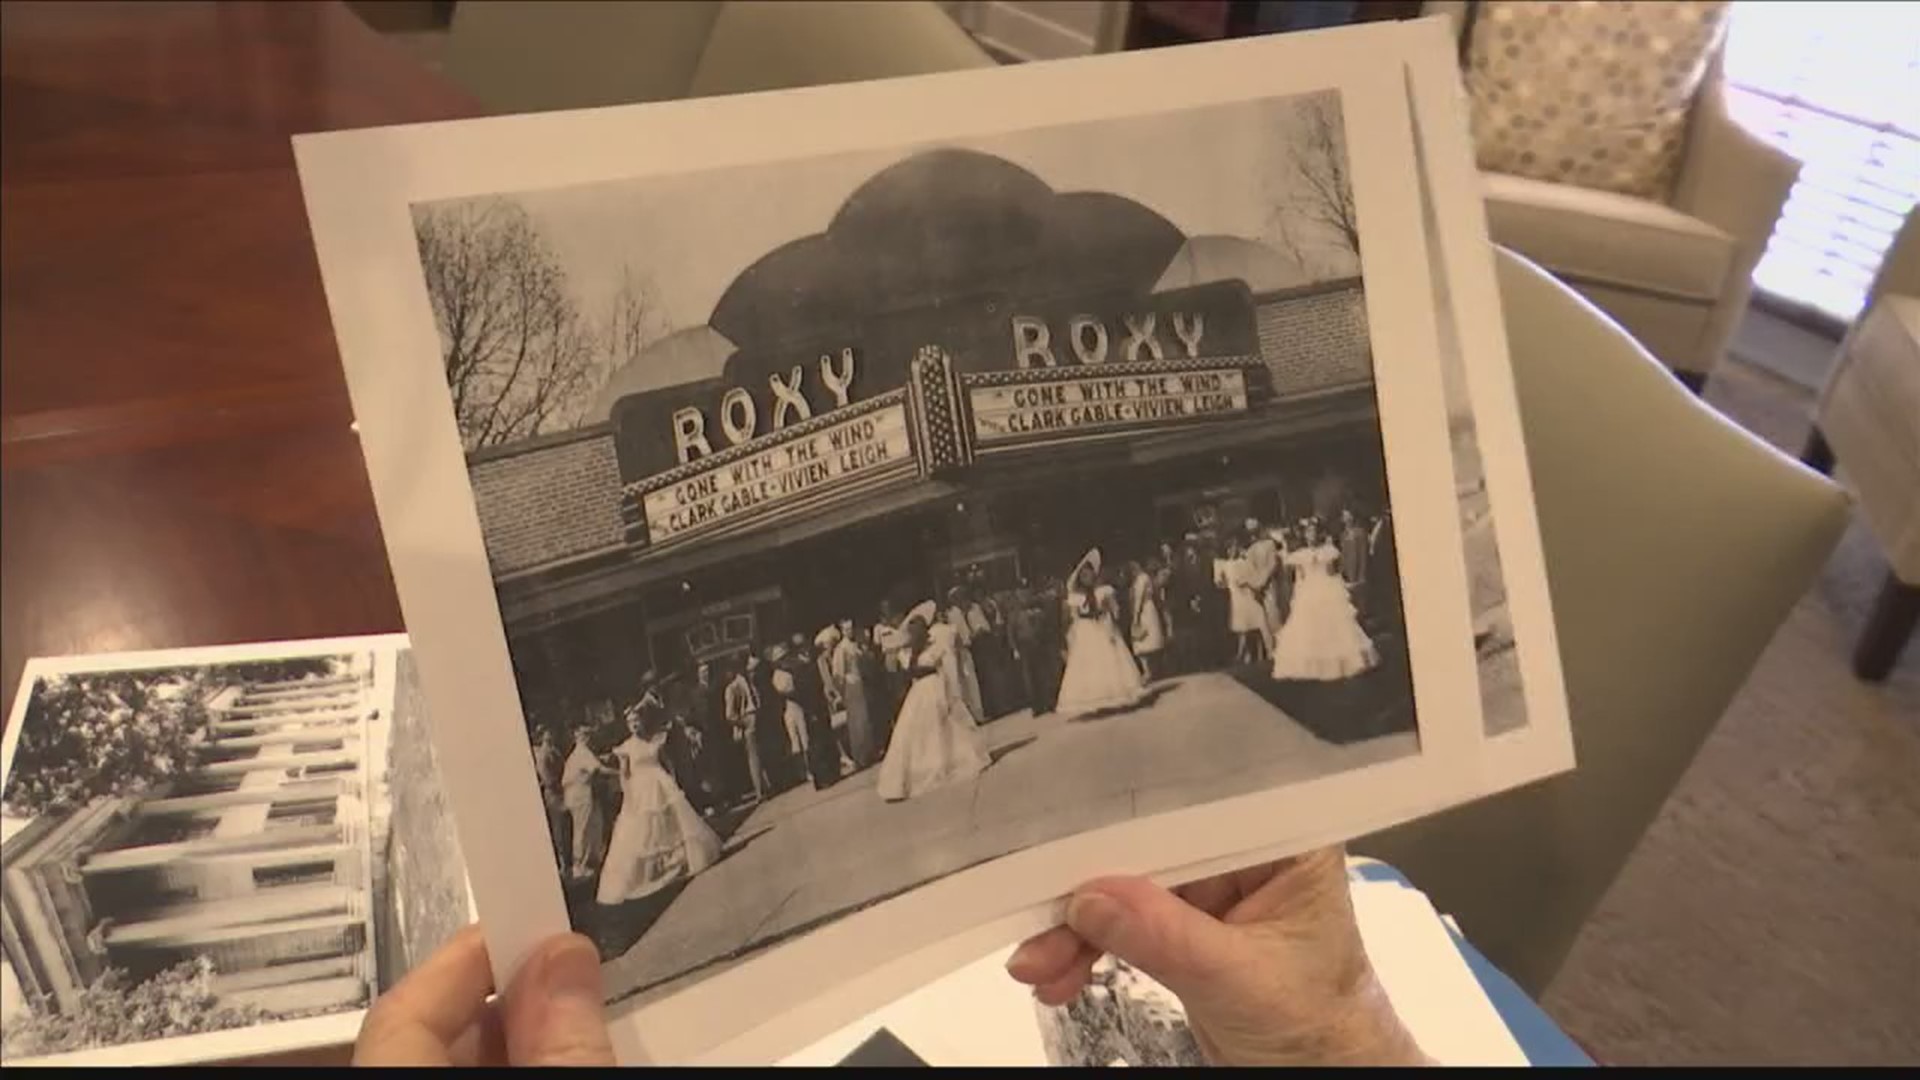 A Huntsville native has helped keep Alabama's early years alive through her work as a photographic historian.